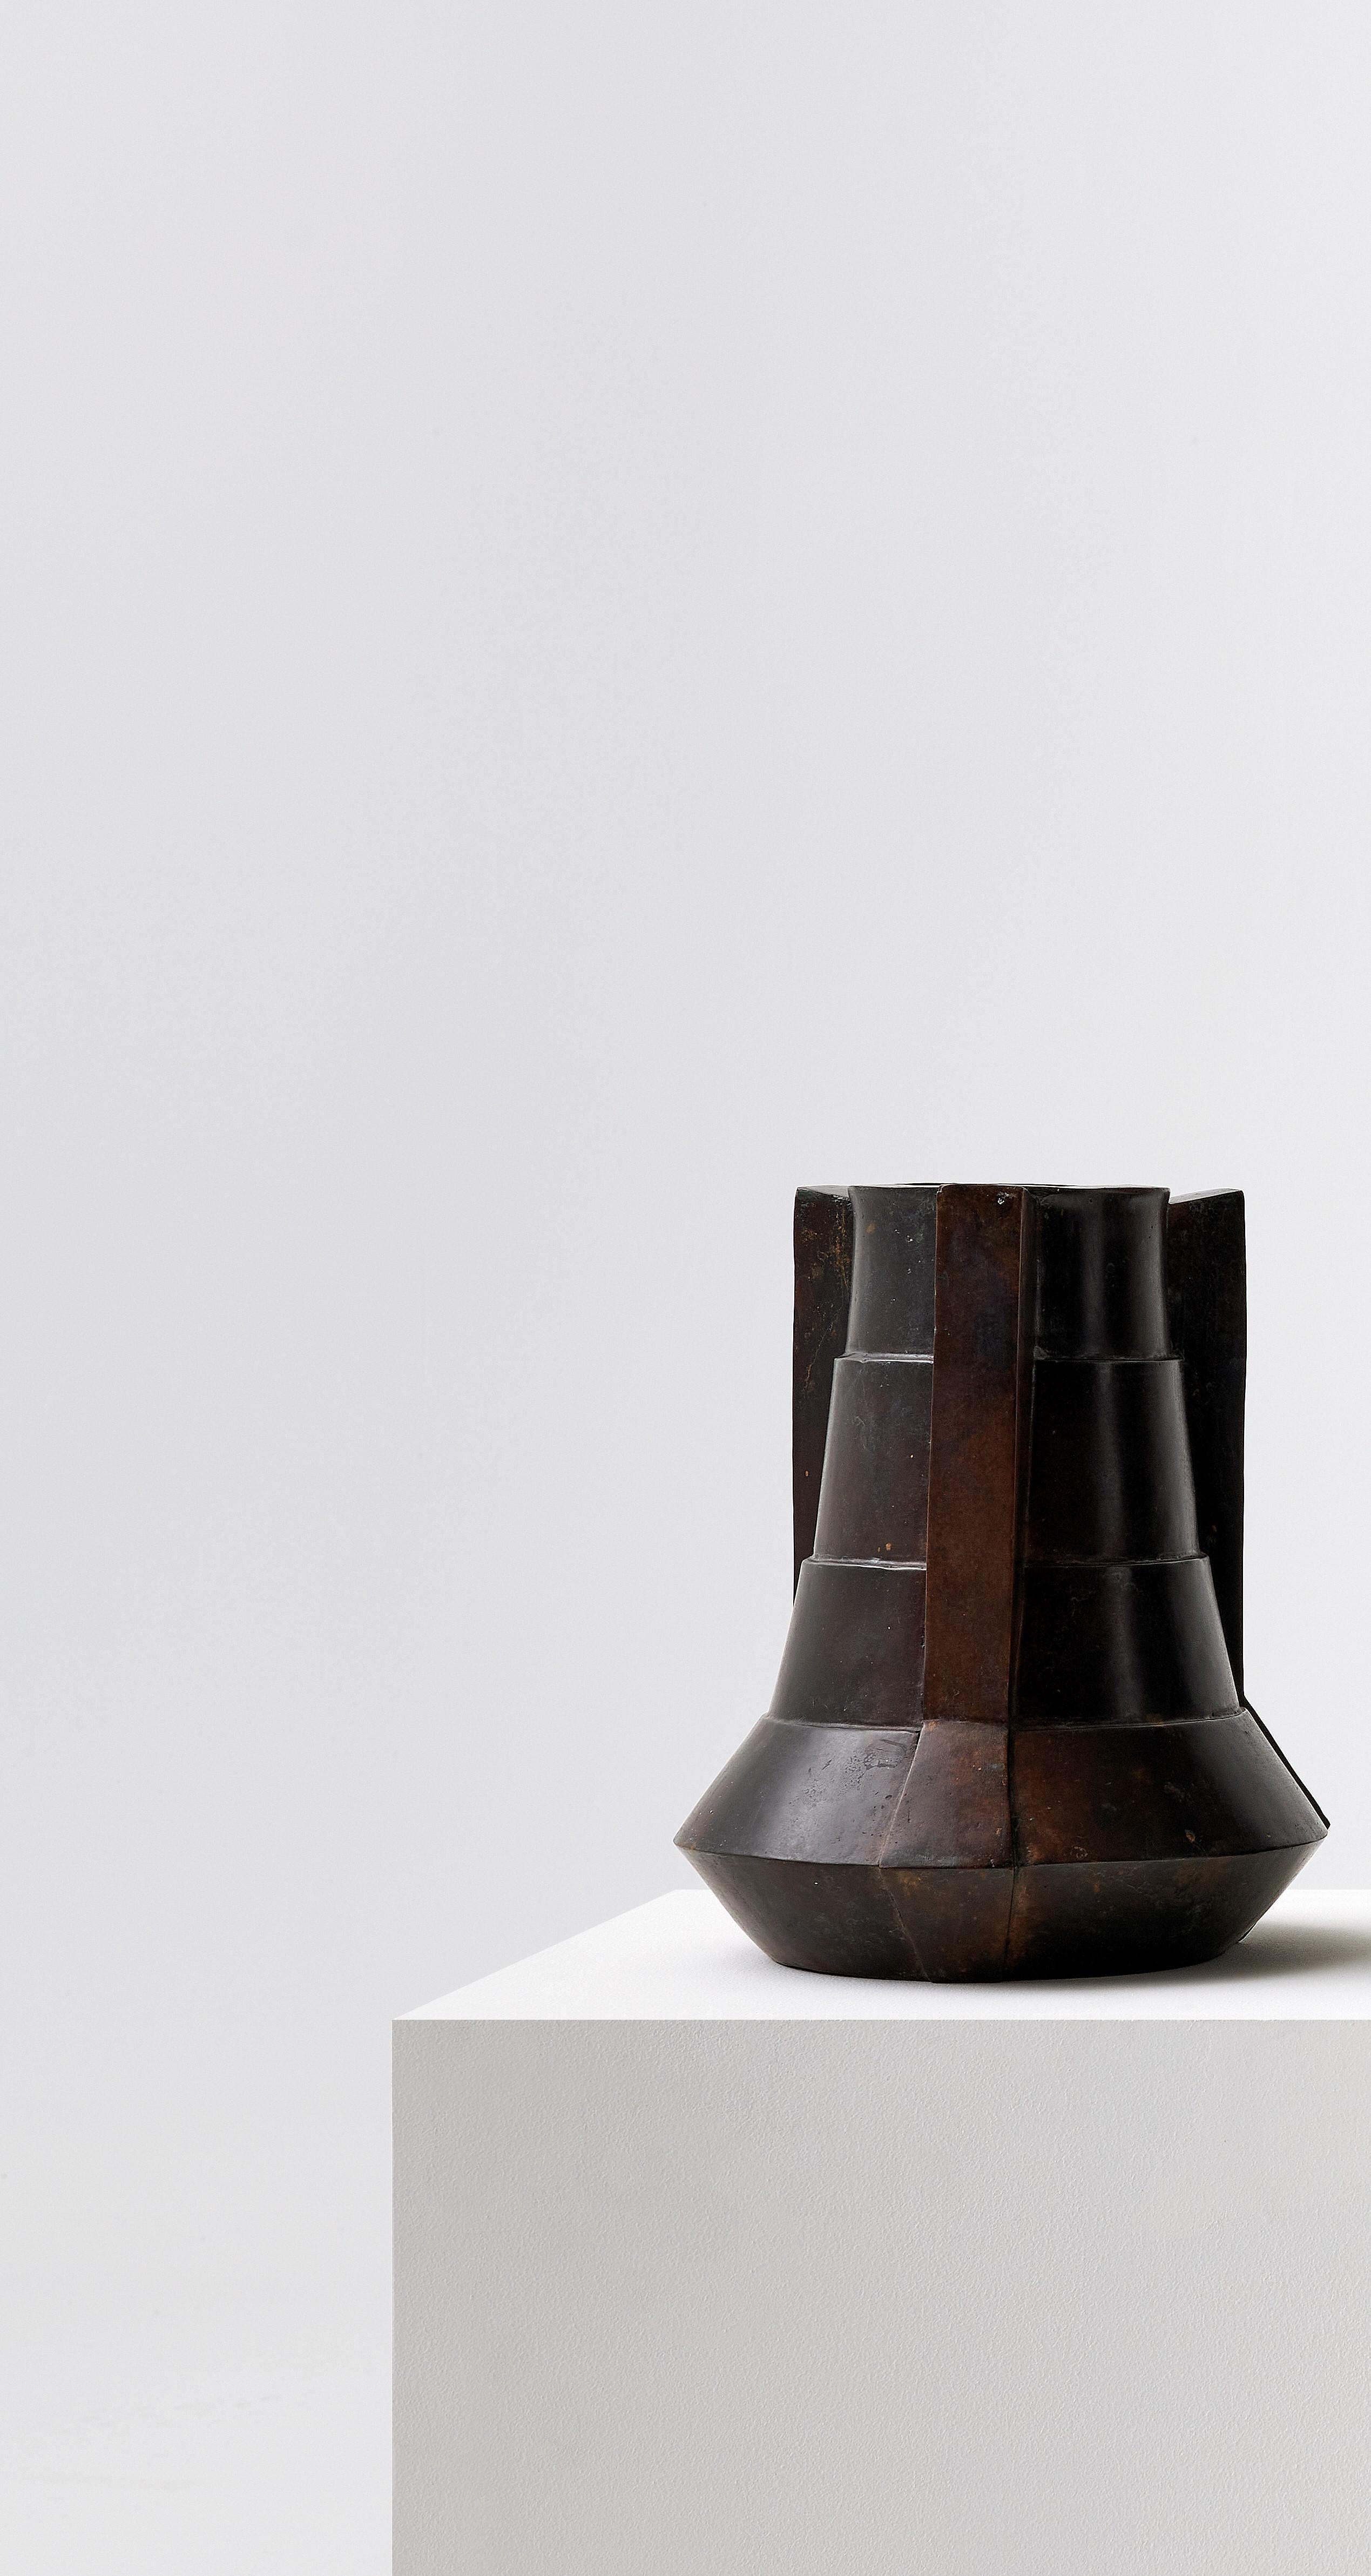 Bronze vase by Lupo Horio¯kami
Dimensions: Diameter 20 x height 30 cm
Materials: Bronze medium acid

“The artwork [...] arises when the mind is willing to accept reality as it was the first time it meets it” (“aesthetics of the void”, g.